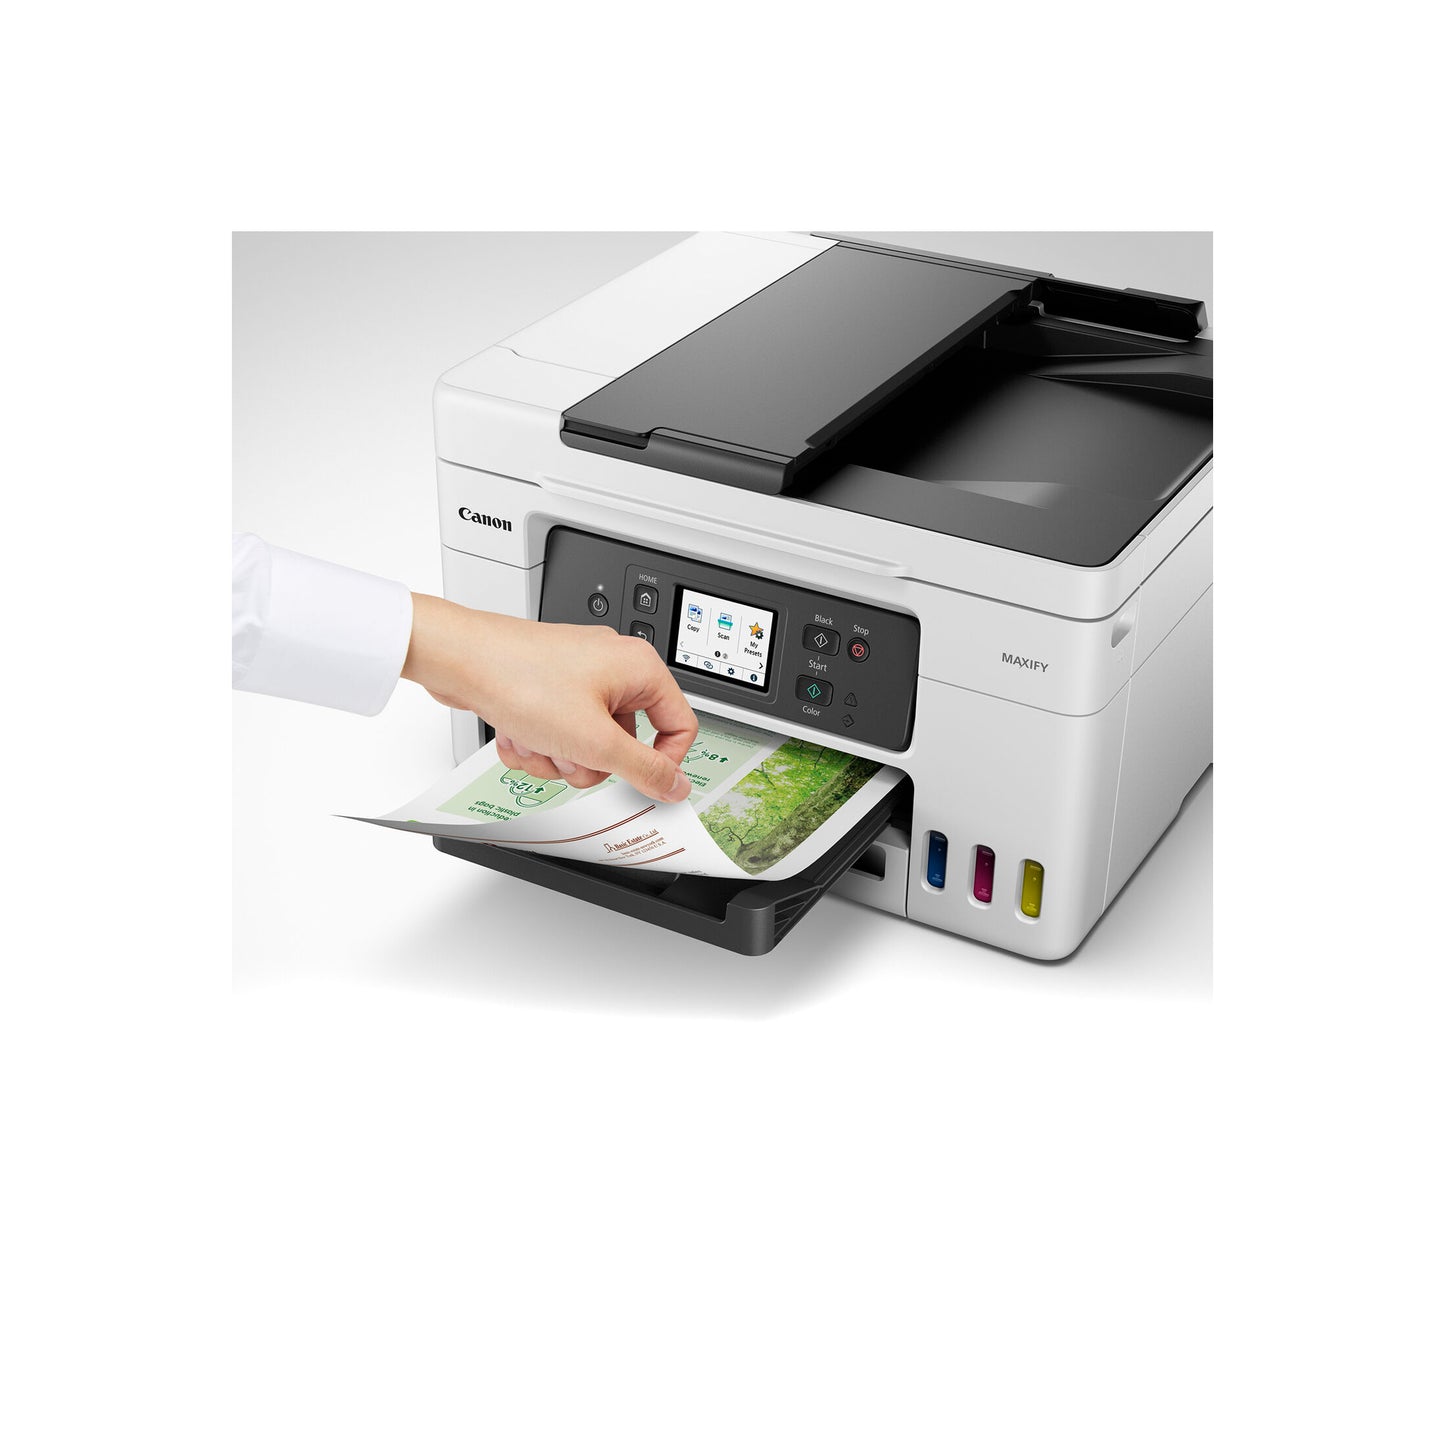 MegaTank MAXIFY GX4020 Wireless Small Office All-in-One Printer